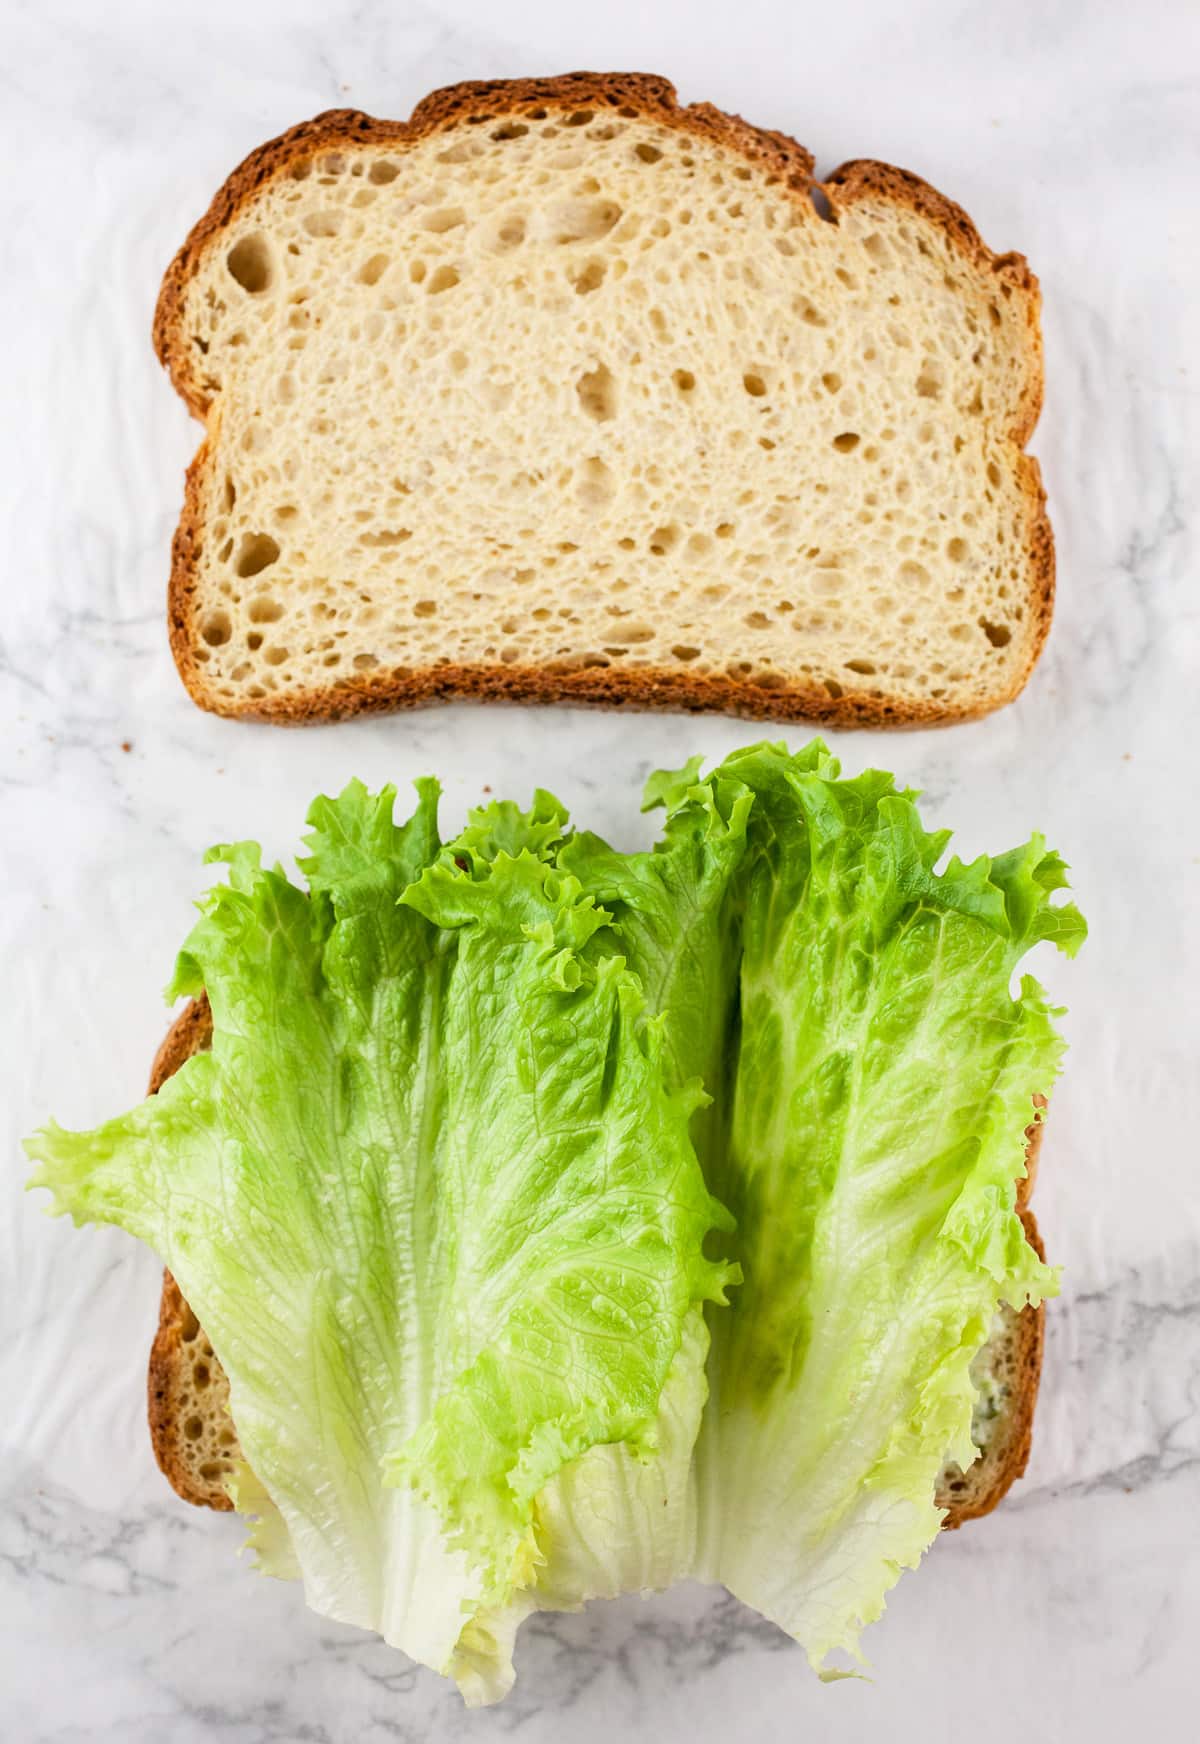 Bread slices with lettuce.